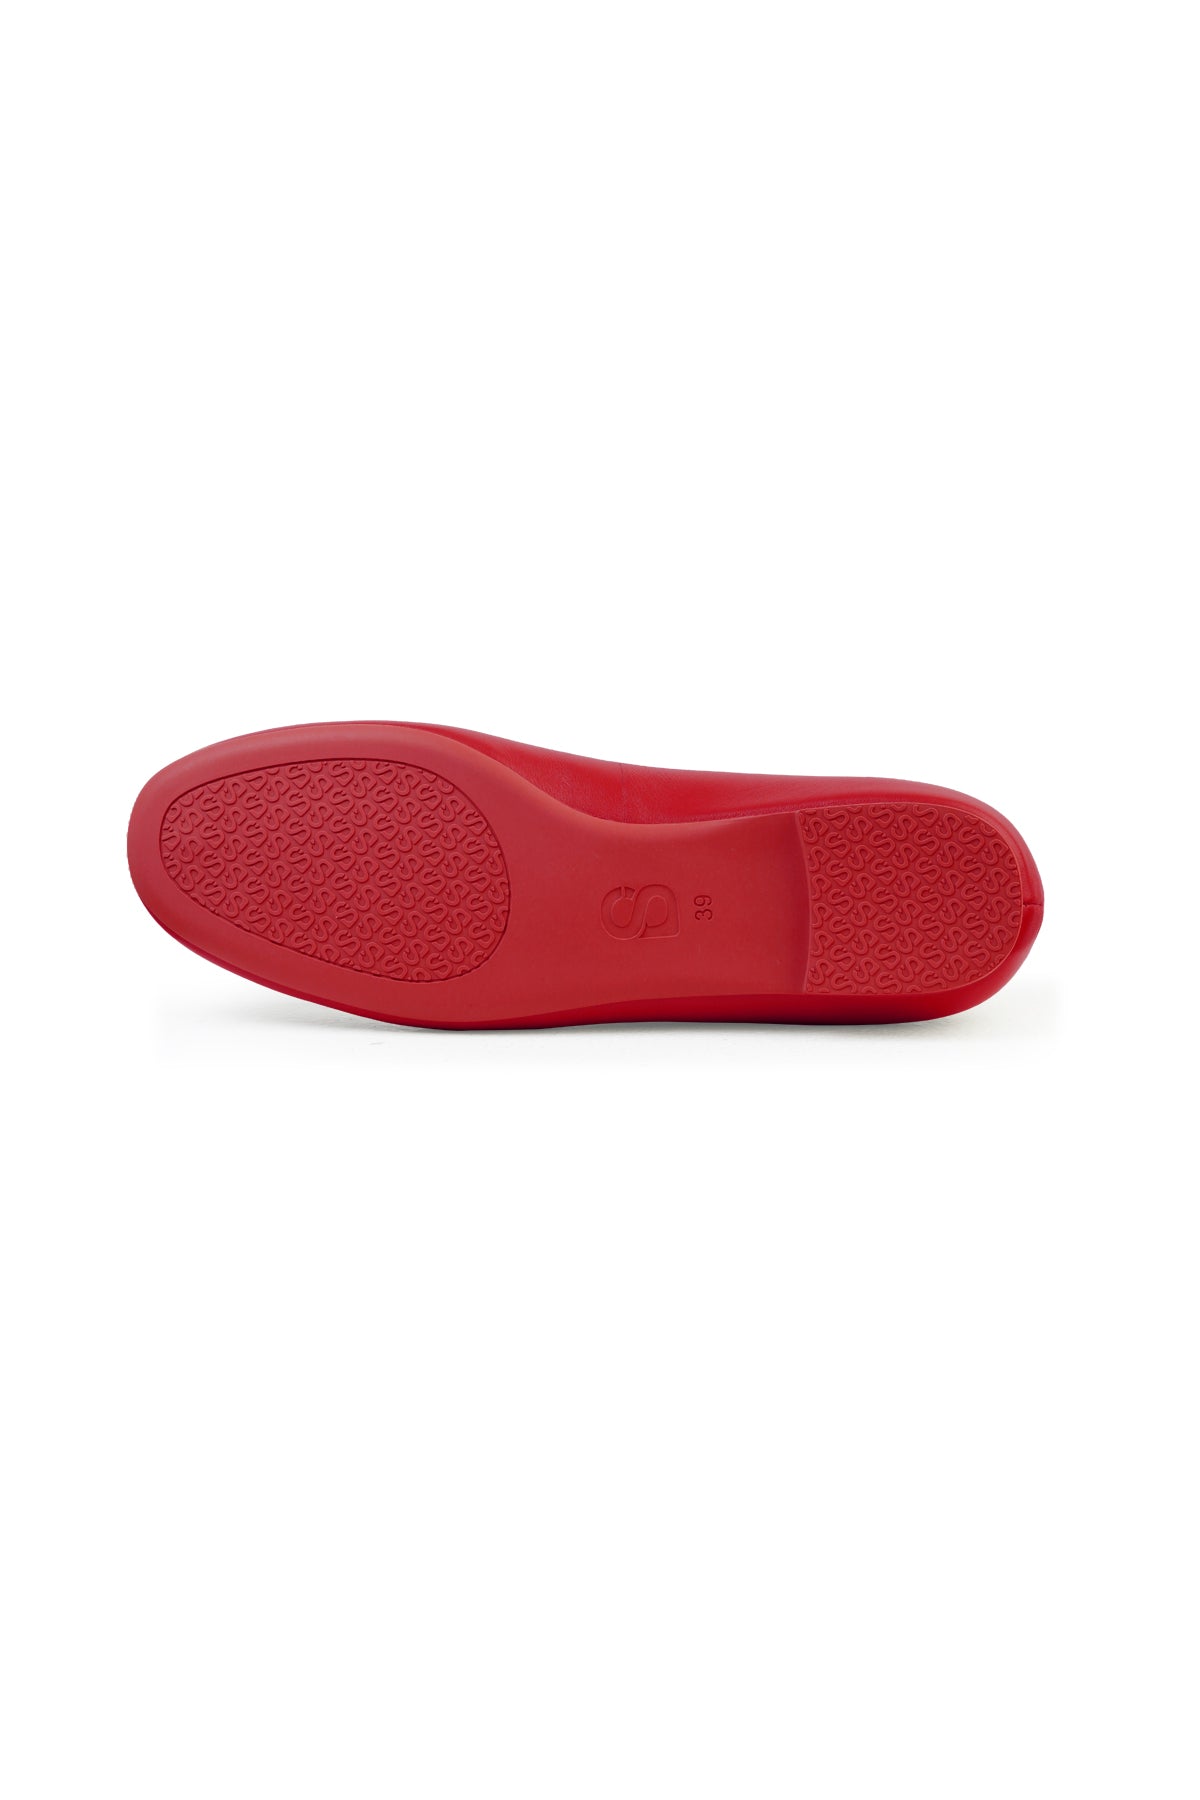 Cera Shoes - Red